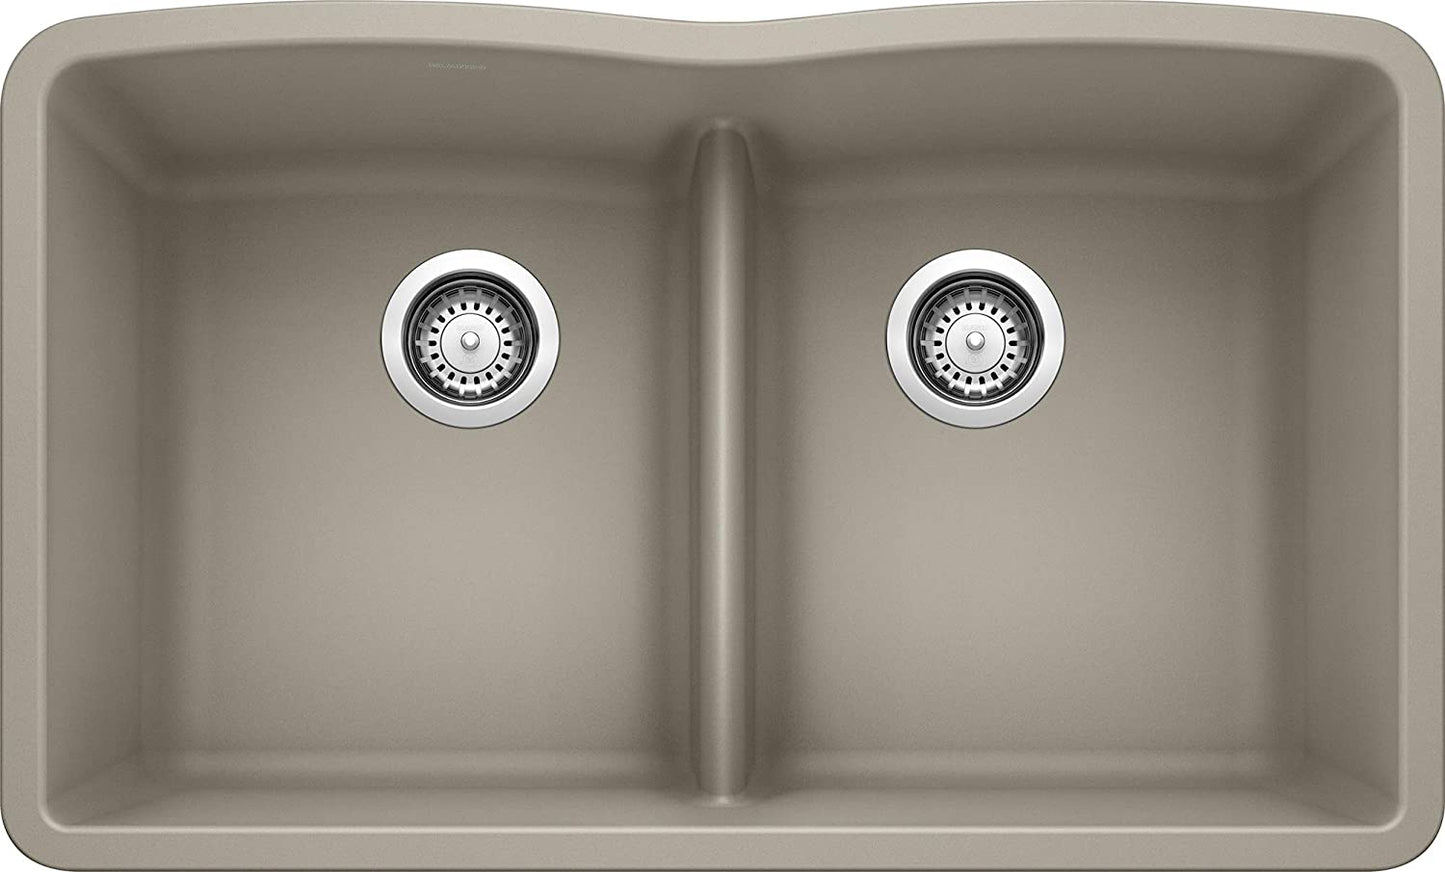 Diamond Double Bowl Undermount Kitchen Sink with Low Divide - Truffle